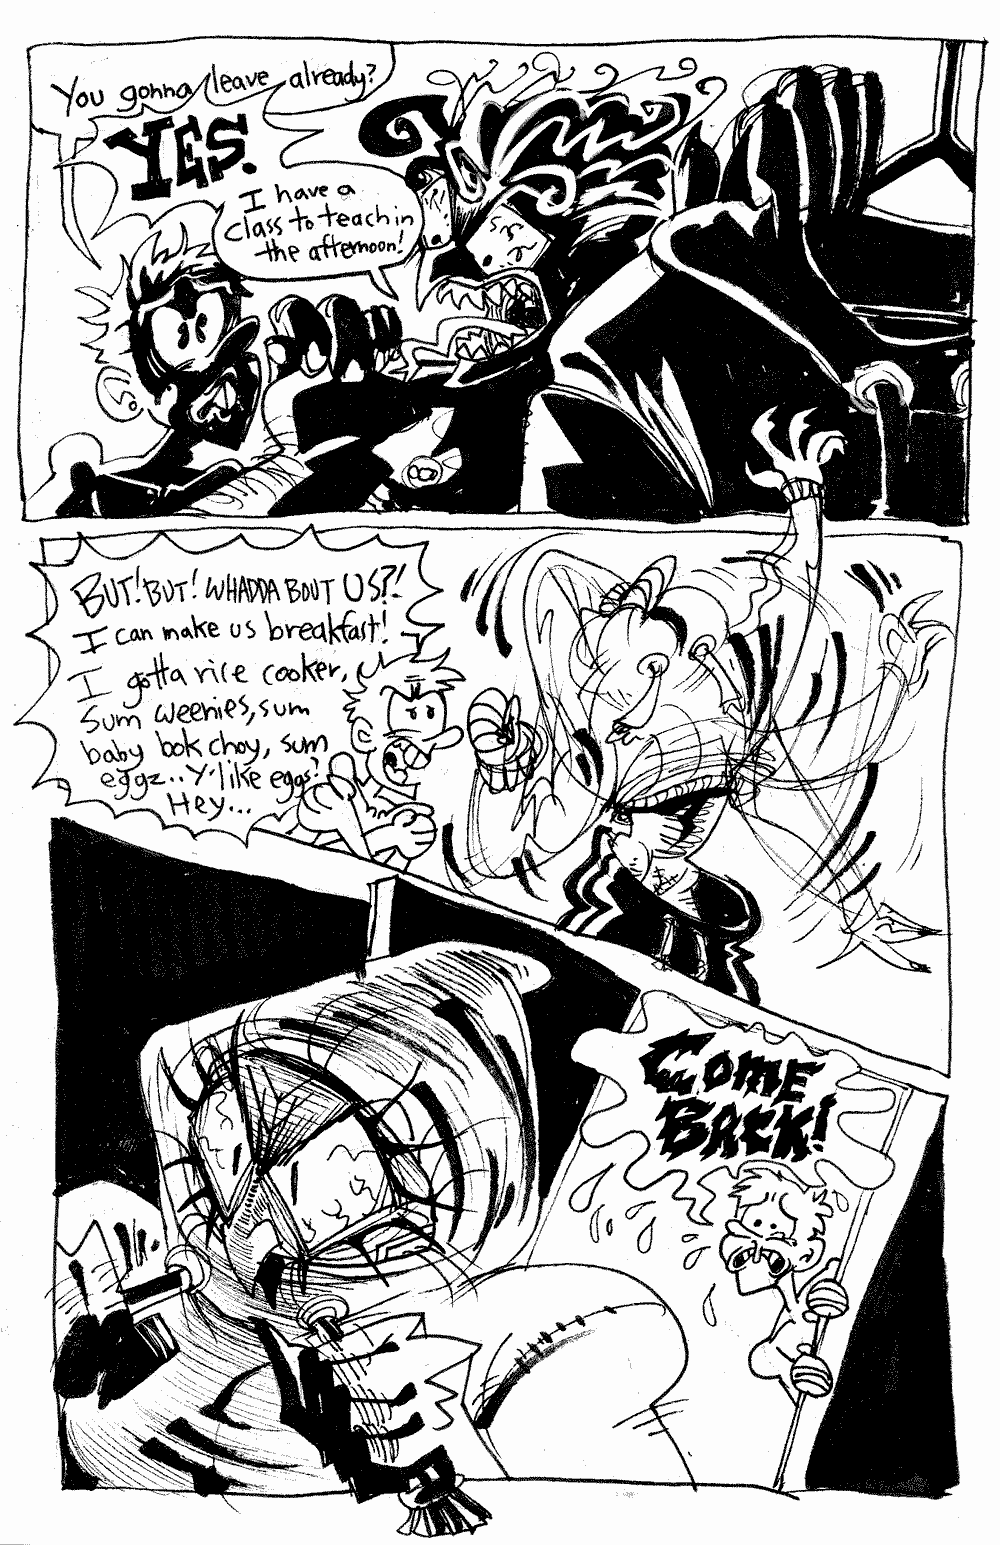 Page 13 - Basile begins to take a hoodie off of the hanger.  Ollie pleads.  'You gonna leave already?' 'YES.  I have a class to teach in the afternoon!'.  Basile squeezes into the too-small hoodie, and pulls the hood tight.  Ollie exclaims, 'BUT!  BUT!  WHADDA BOUT US?! I can make us breakfast!  I gotta rice cooker, sum weenies, sum baby bok choy, sum eggz... Y'like eggs?  Hey... COME BACK!'.  Basile leaves angrily.